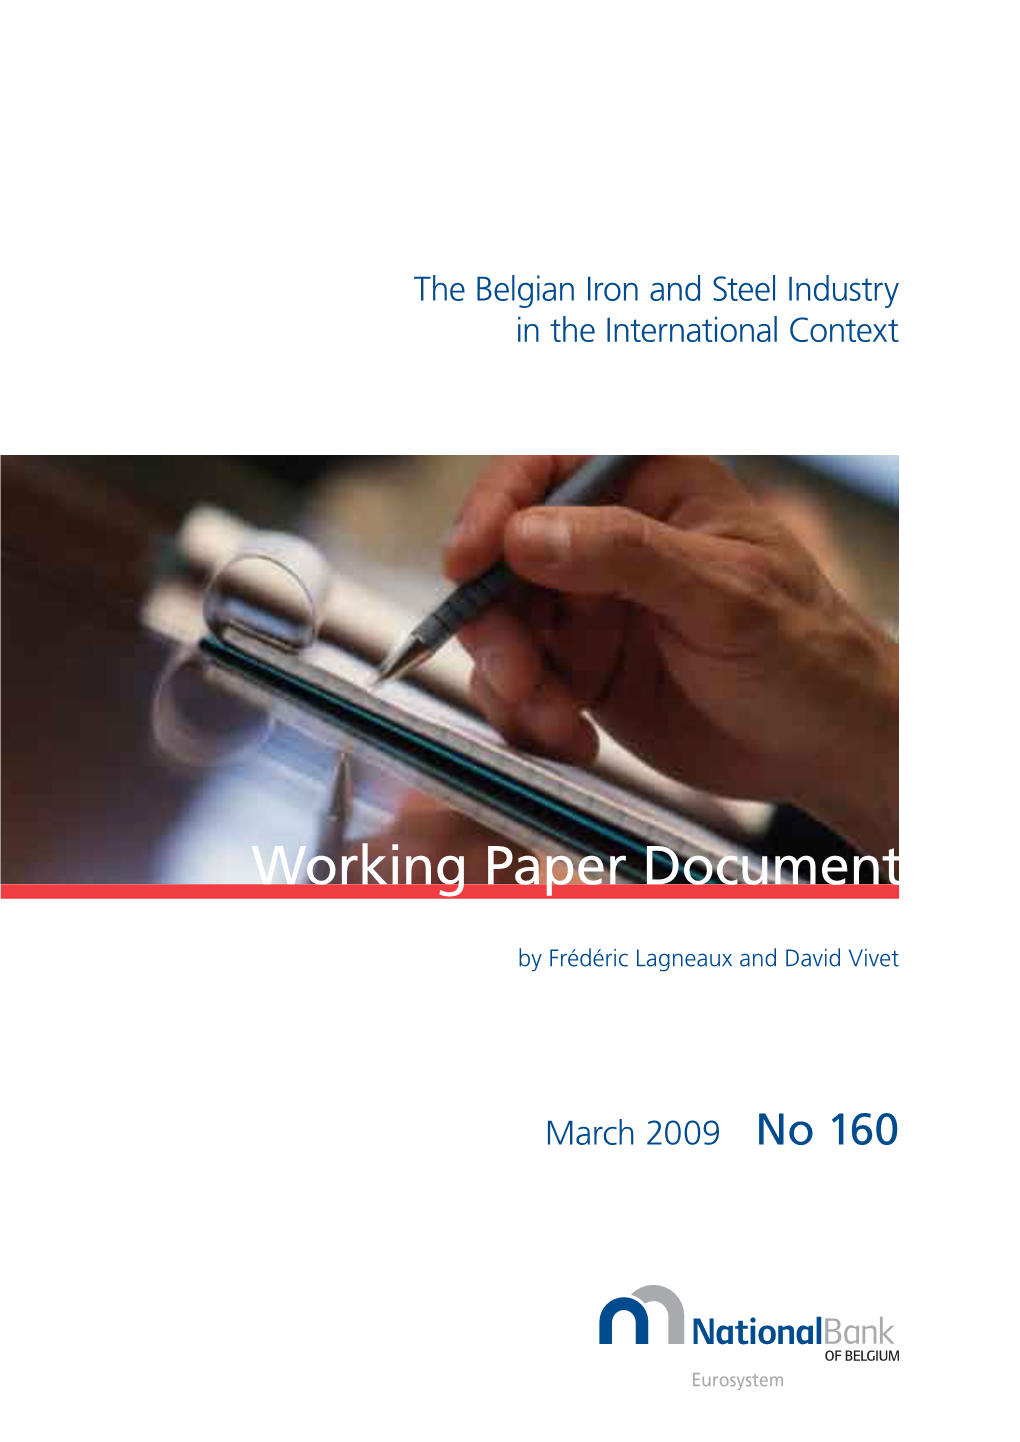 WP160, the Belgian Iron and Steel Industry in the International Context